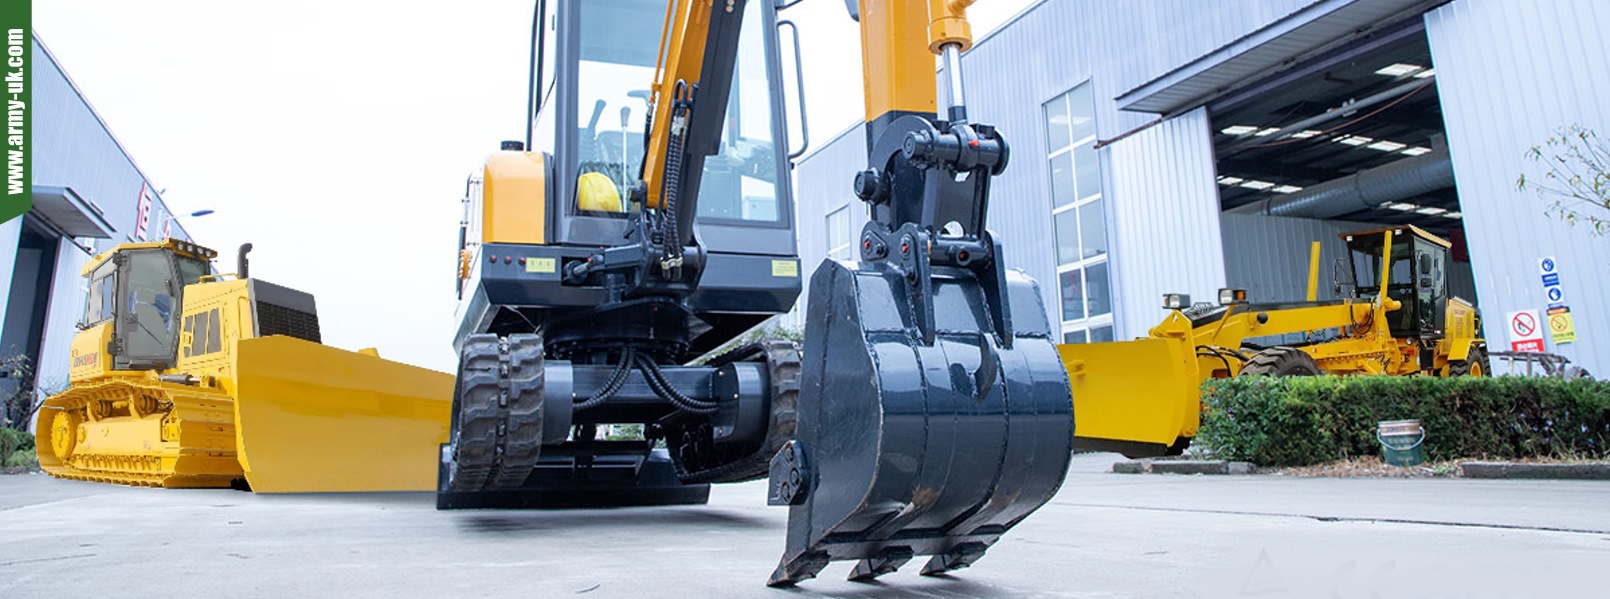 NEw Heavy and compact excavator